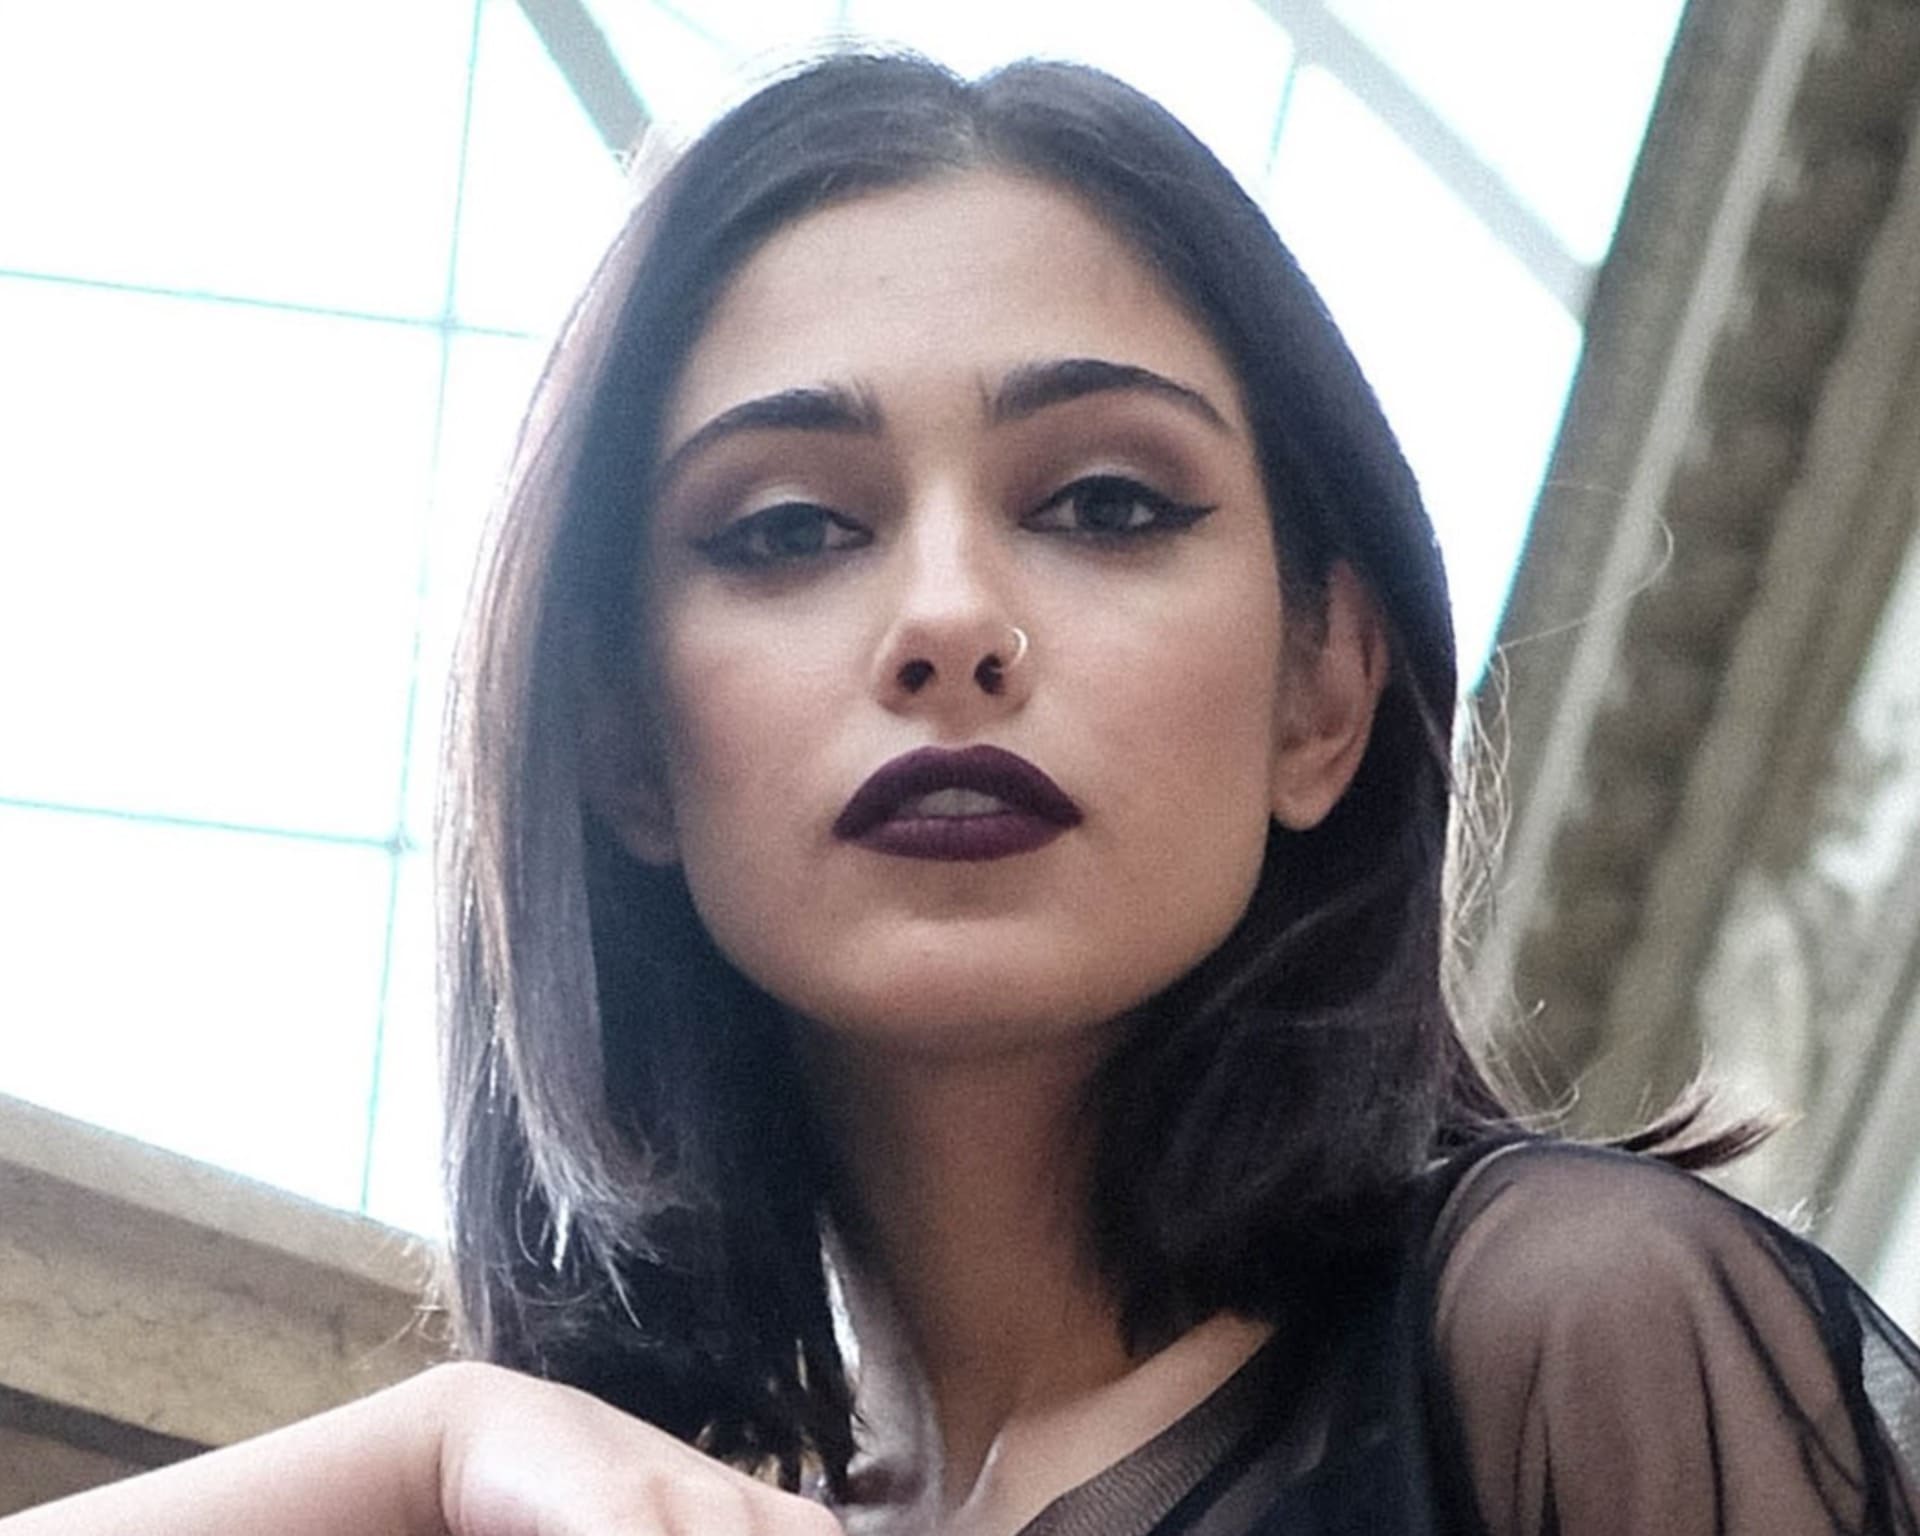 Soft-Goth Make-Up is Trending. Here's What You Need To Do It